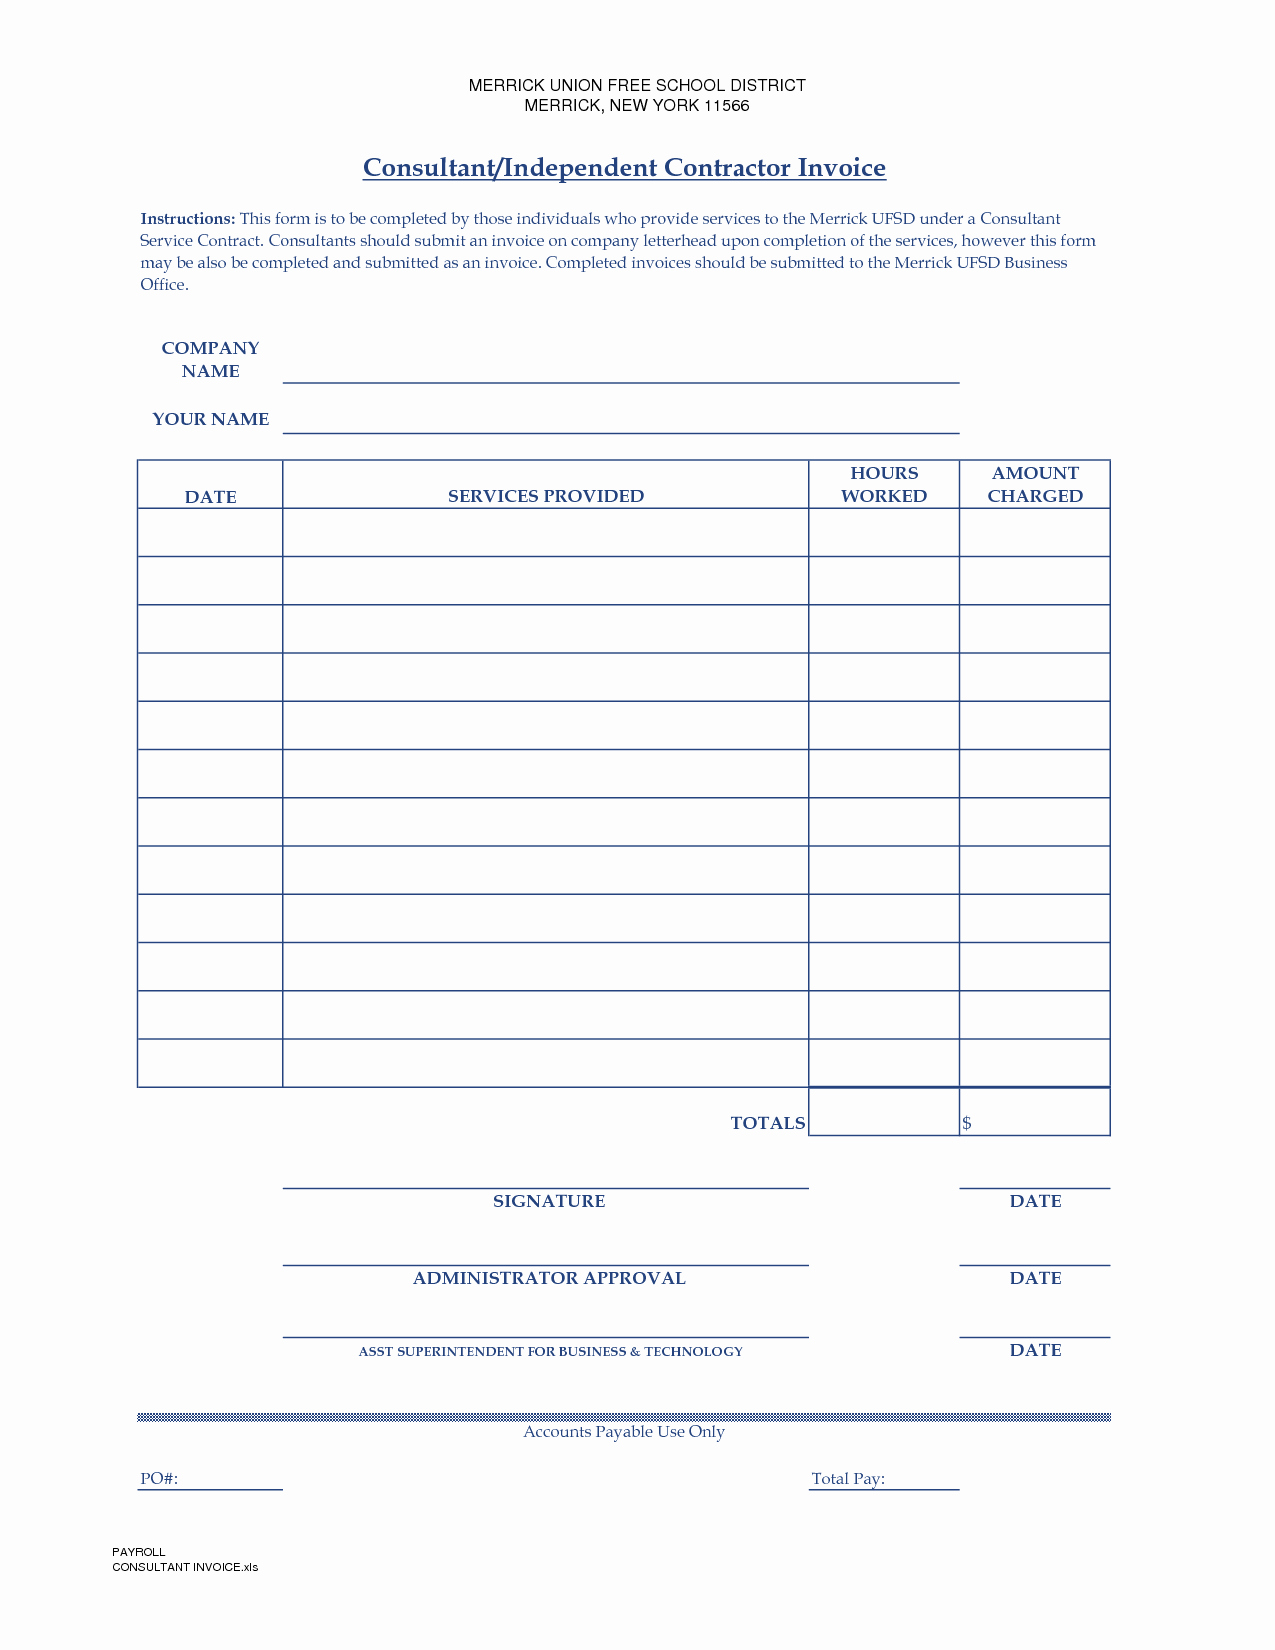 Independent Contractor Invoice Template Excel Lovely Independent Contractor Invoice Template